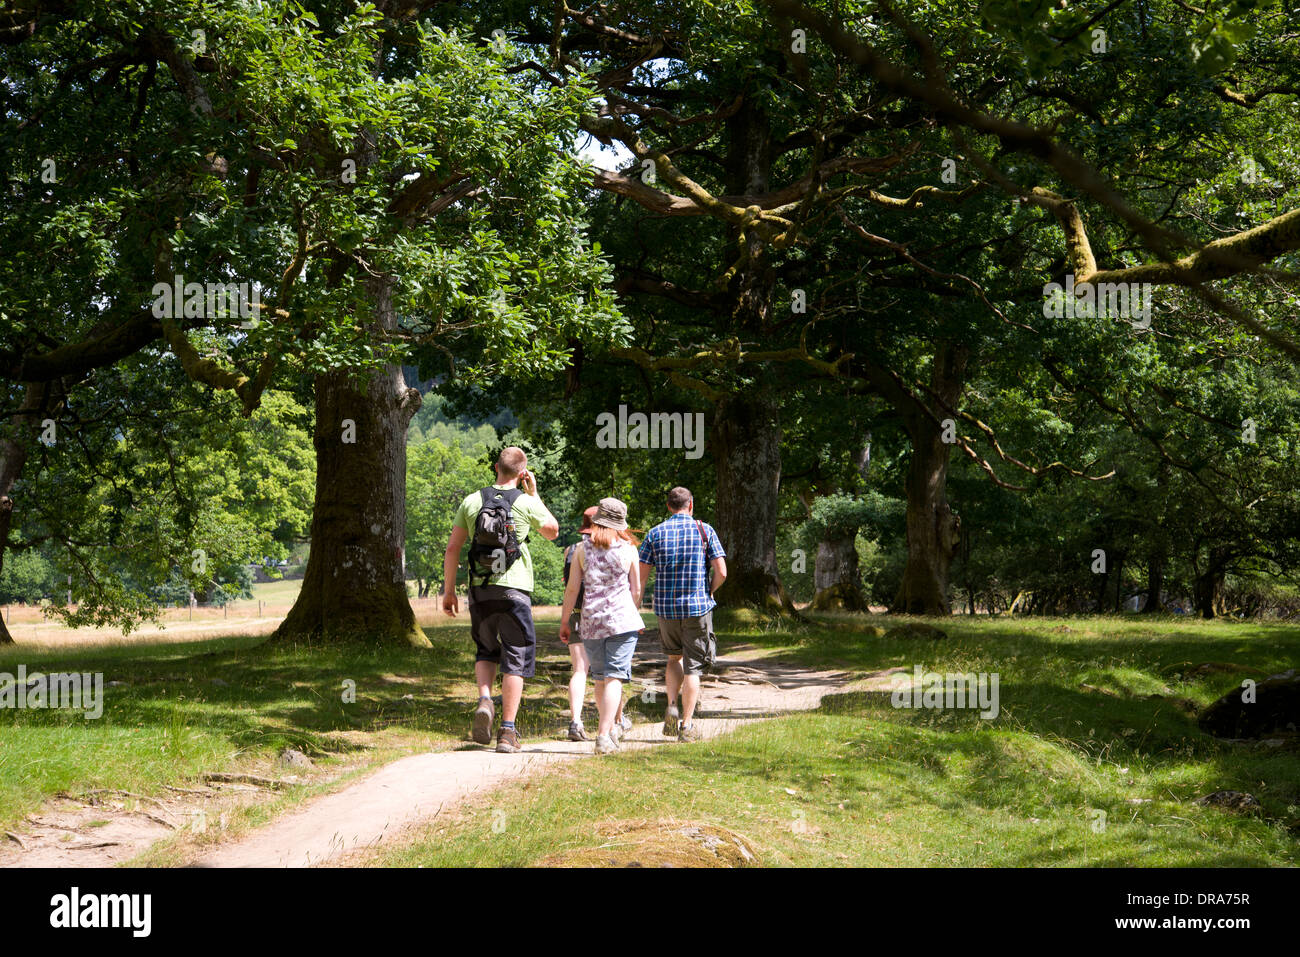 Walking, walkers, hiking, winding path, trees, wide open spaces, vacation, holiday, summer, ram shackle house, abandoned Stock Photo